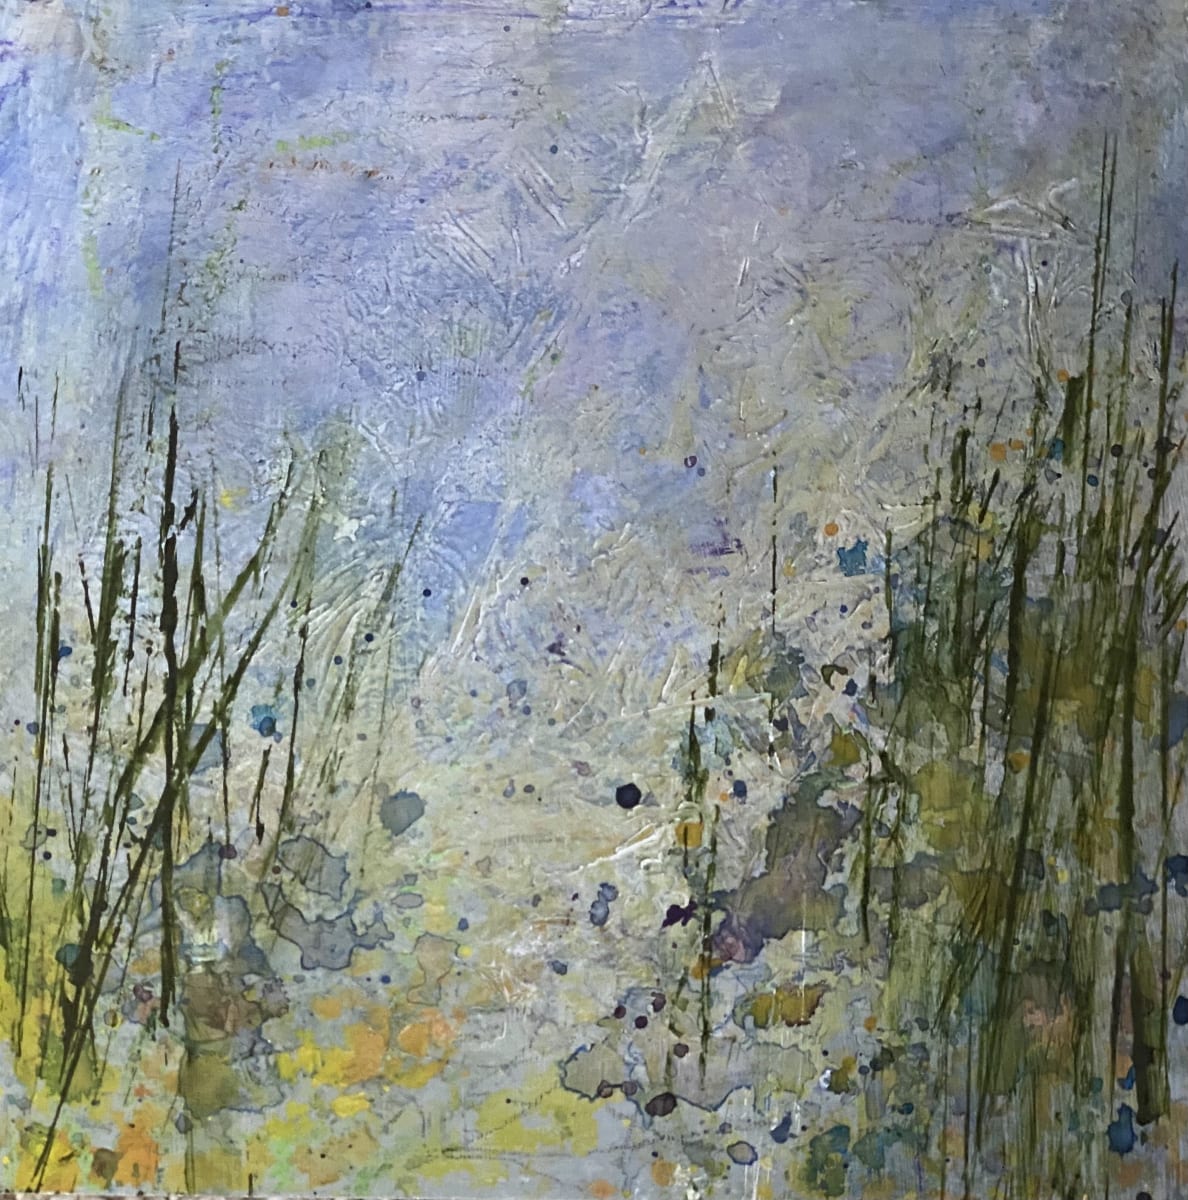 Juanita Bellavance, Pebbles and reeds and water, oh my!, From the 25 Days of Minis portfolio, 2021, Acrylic on panel, 6 x 6 inches, Framed by Juanita  Image: Pebbles and reeds and water, oh my!